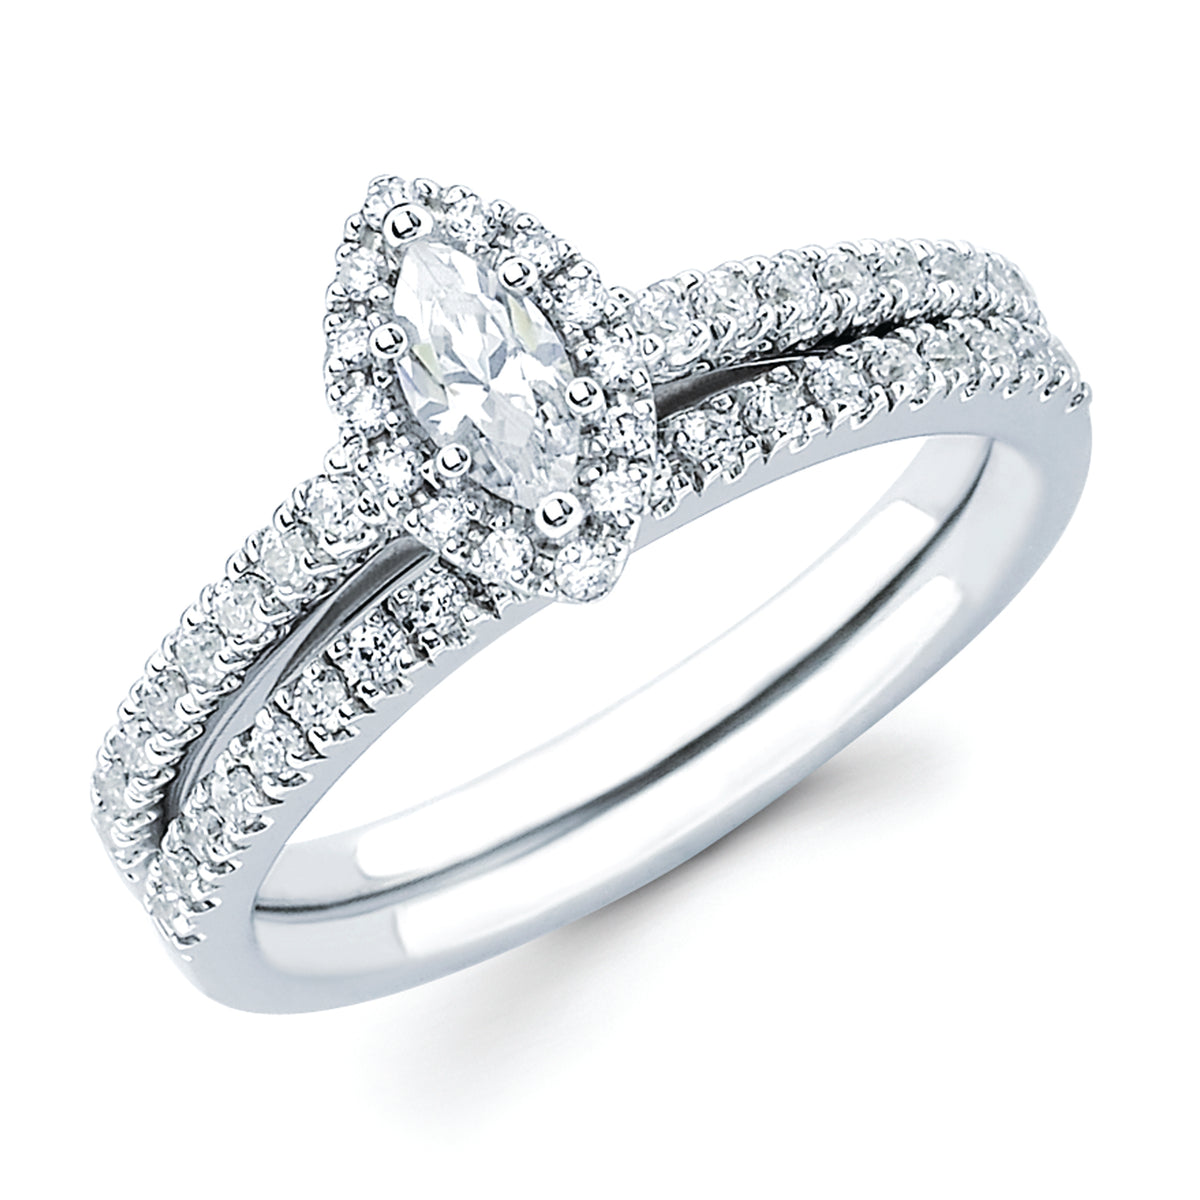 Halo Bridal: 1/4 Ctw. Diamond Halo Semi Mount available for 1/4 Ct. Marquise Cut Center Diamond in 14K Gold